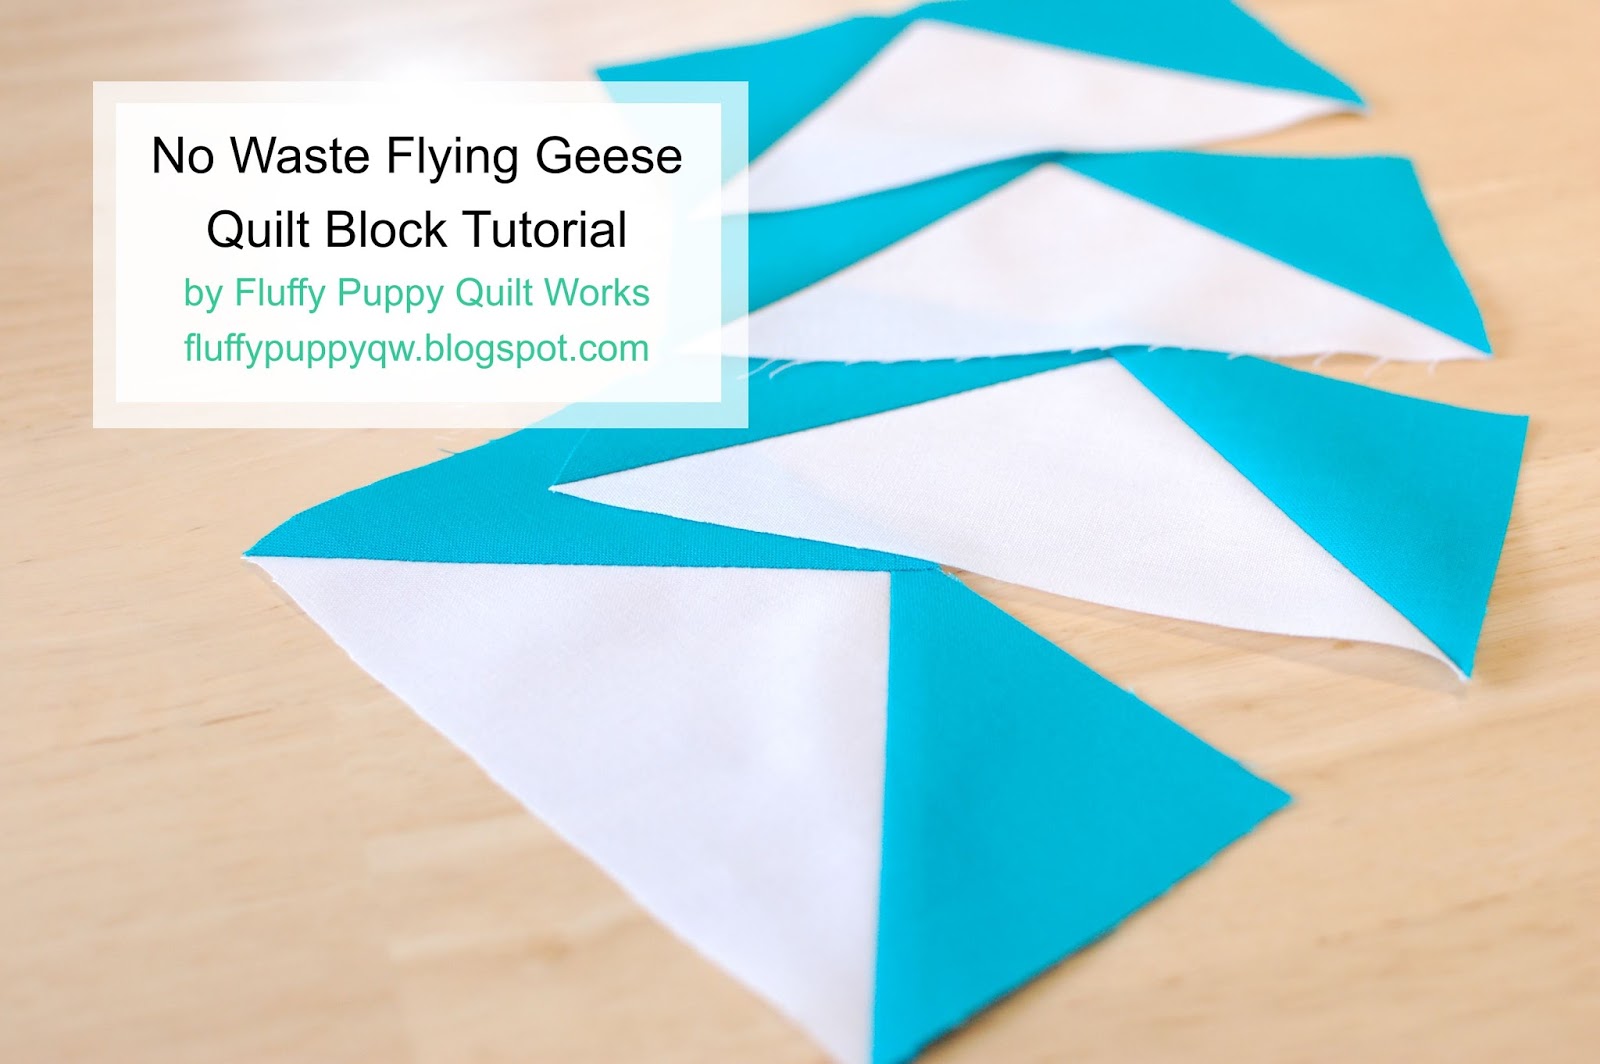 No Waste Flying Geese Chart